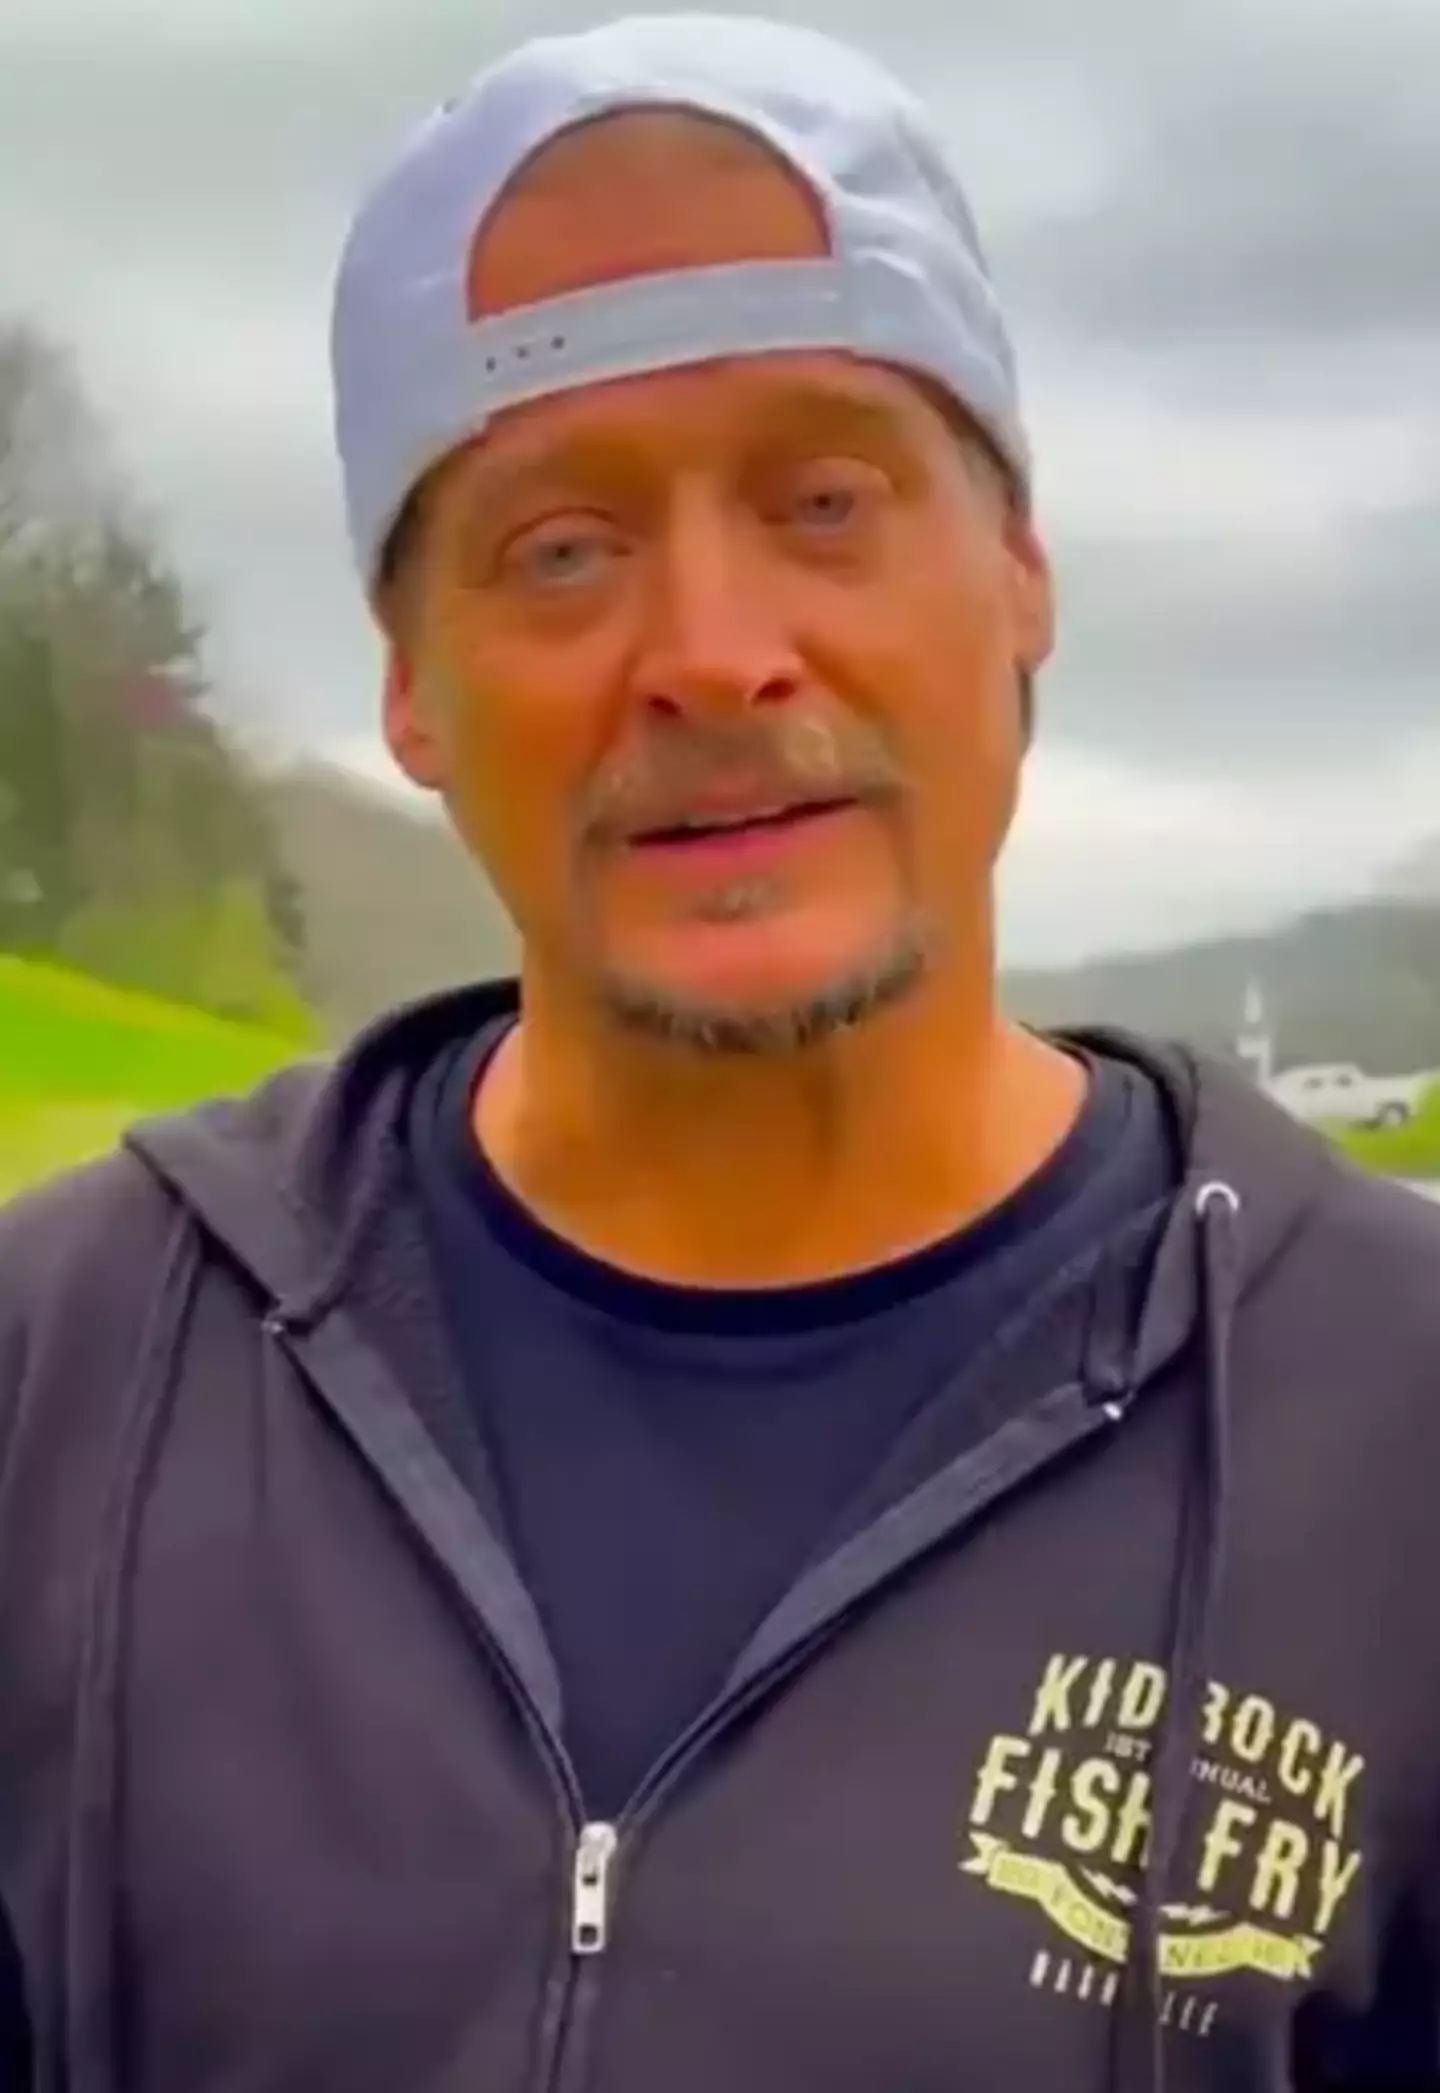 Kid Rock posted a video of himself shooting cans of Bud Light.